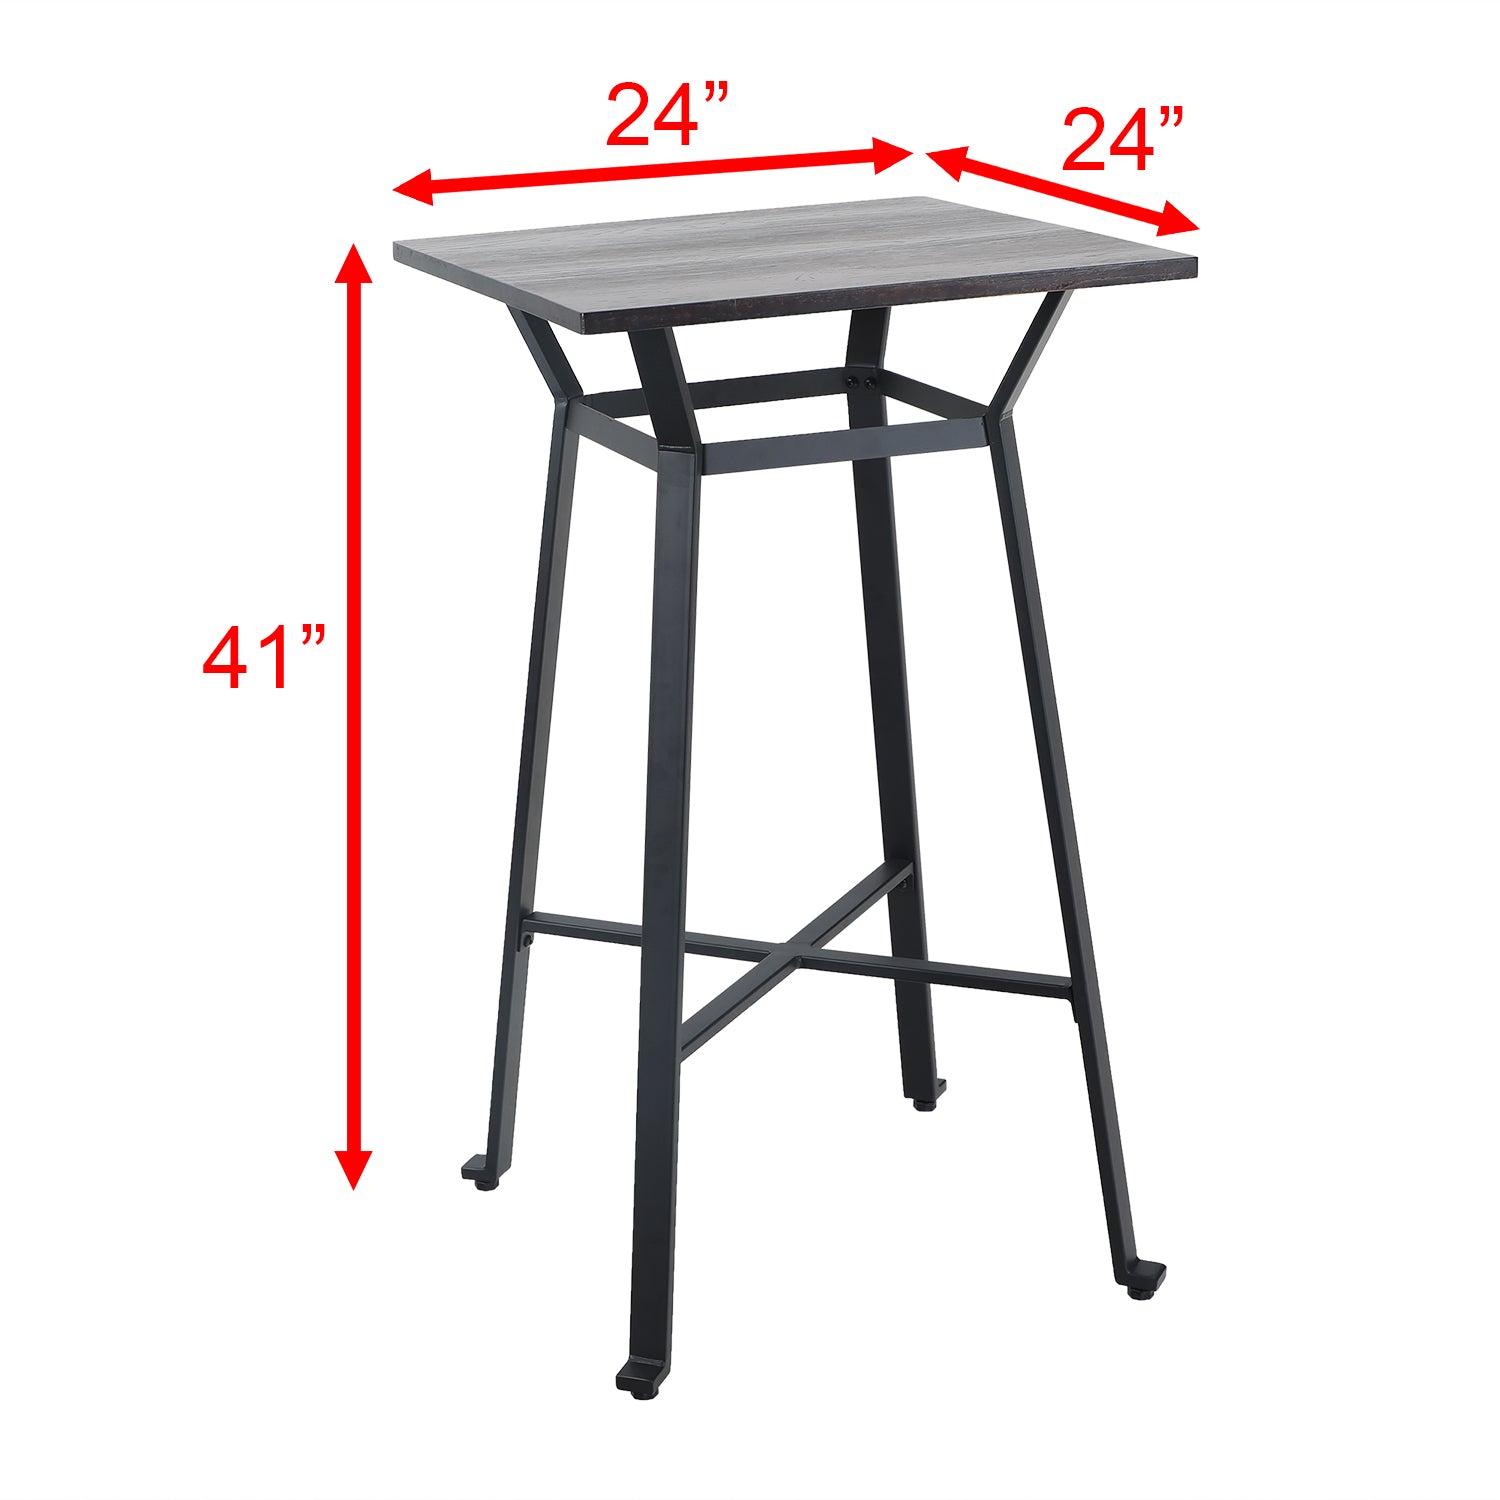 PHI VILLA Metal Bar Table, Square Bar Height Pub Table with Wood Top, 41"